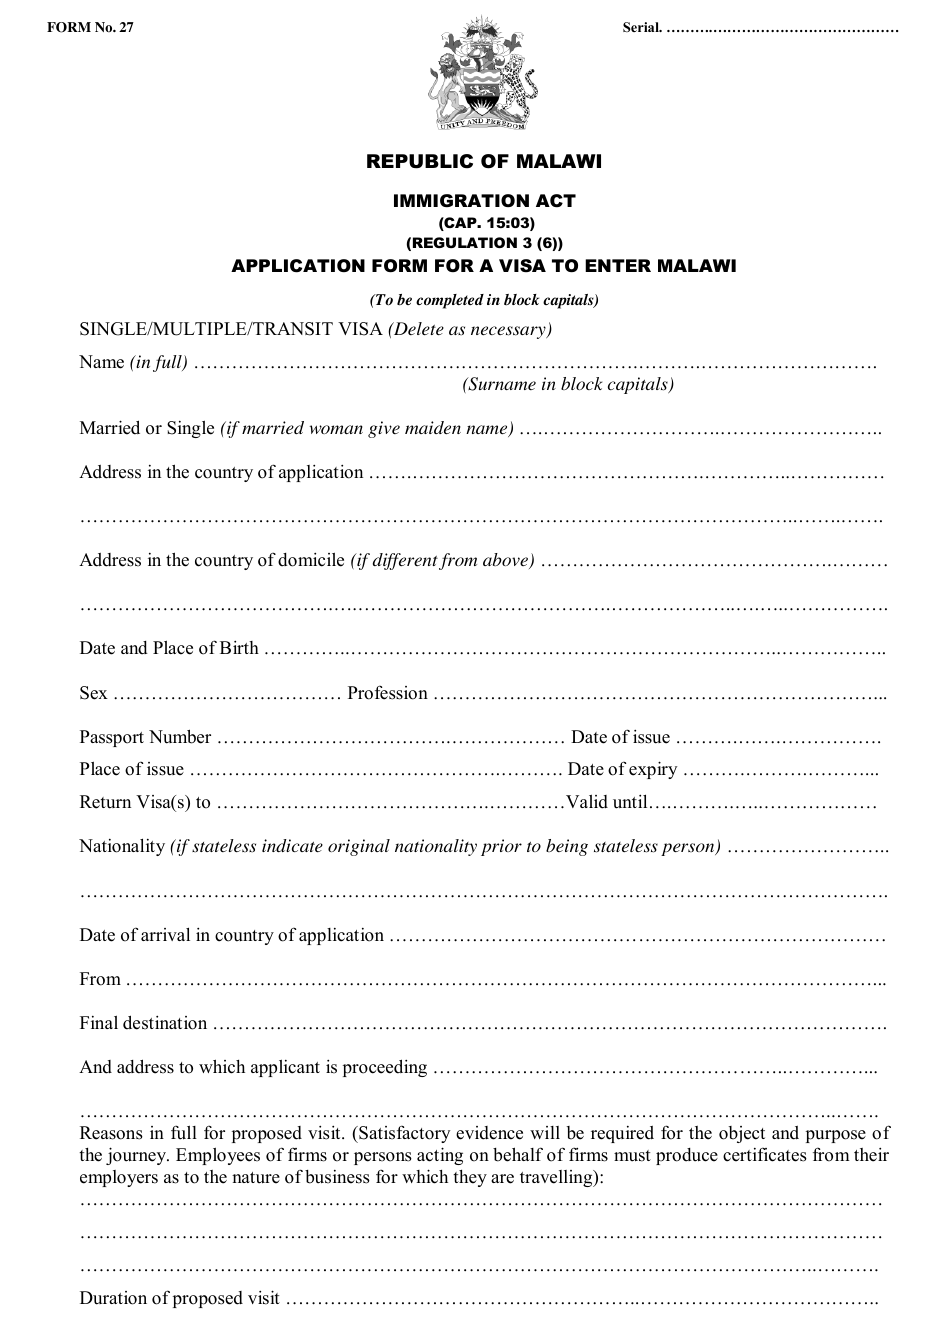 Form 27 Application Form for a Visa to Enter Malawi - Malawi, Page 1